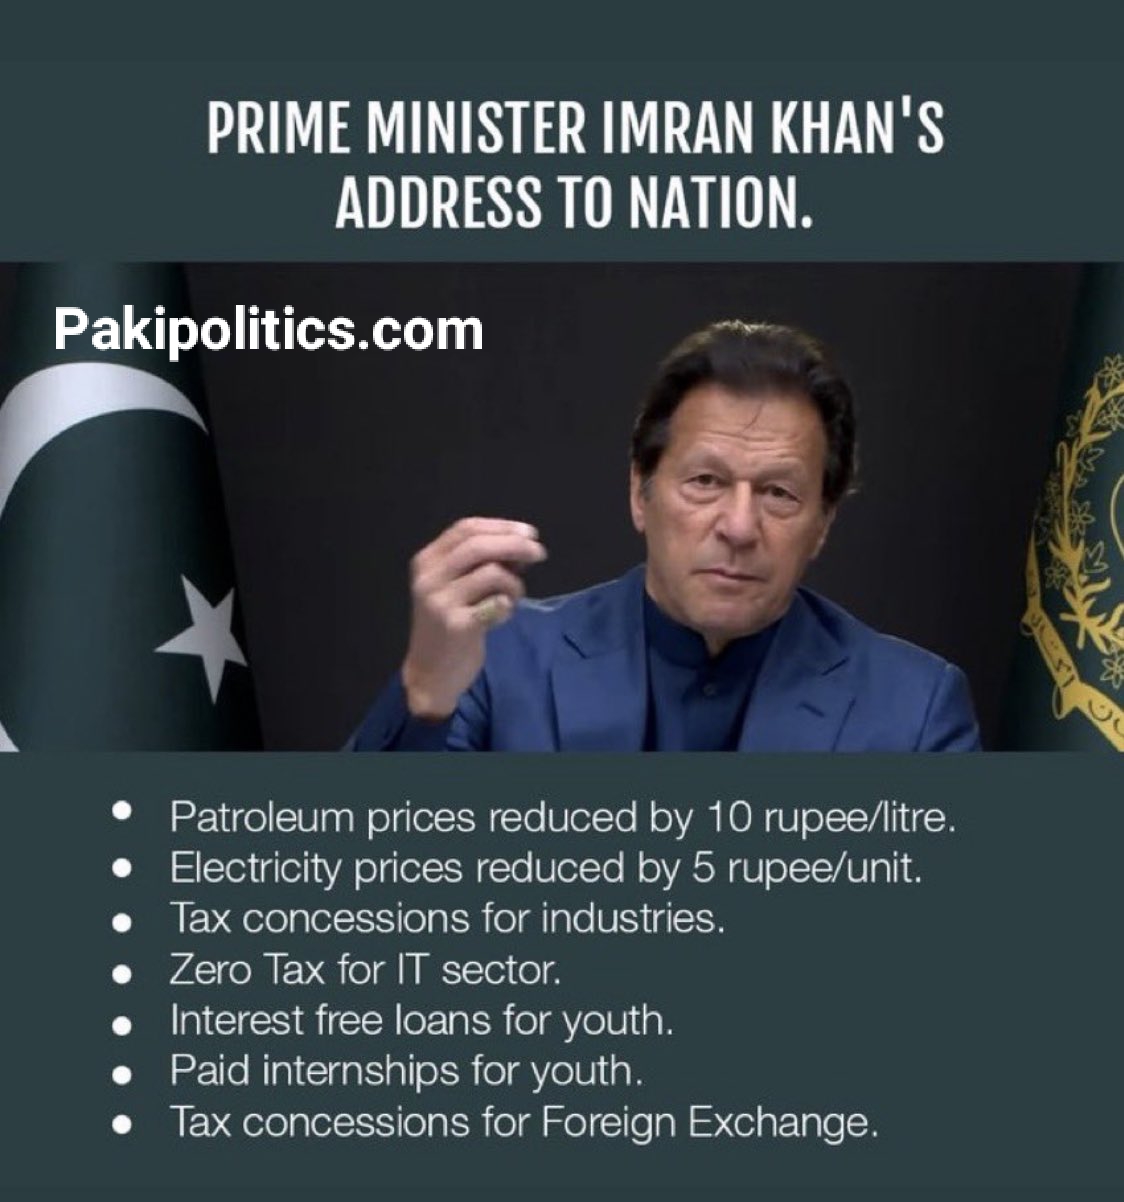 Prime Minister Imran Khan’s address to the nation.